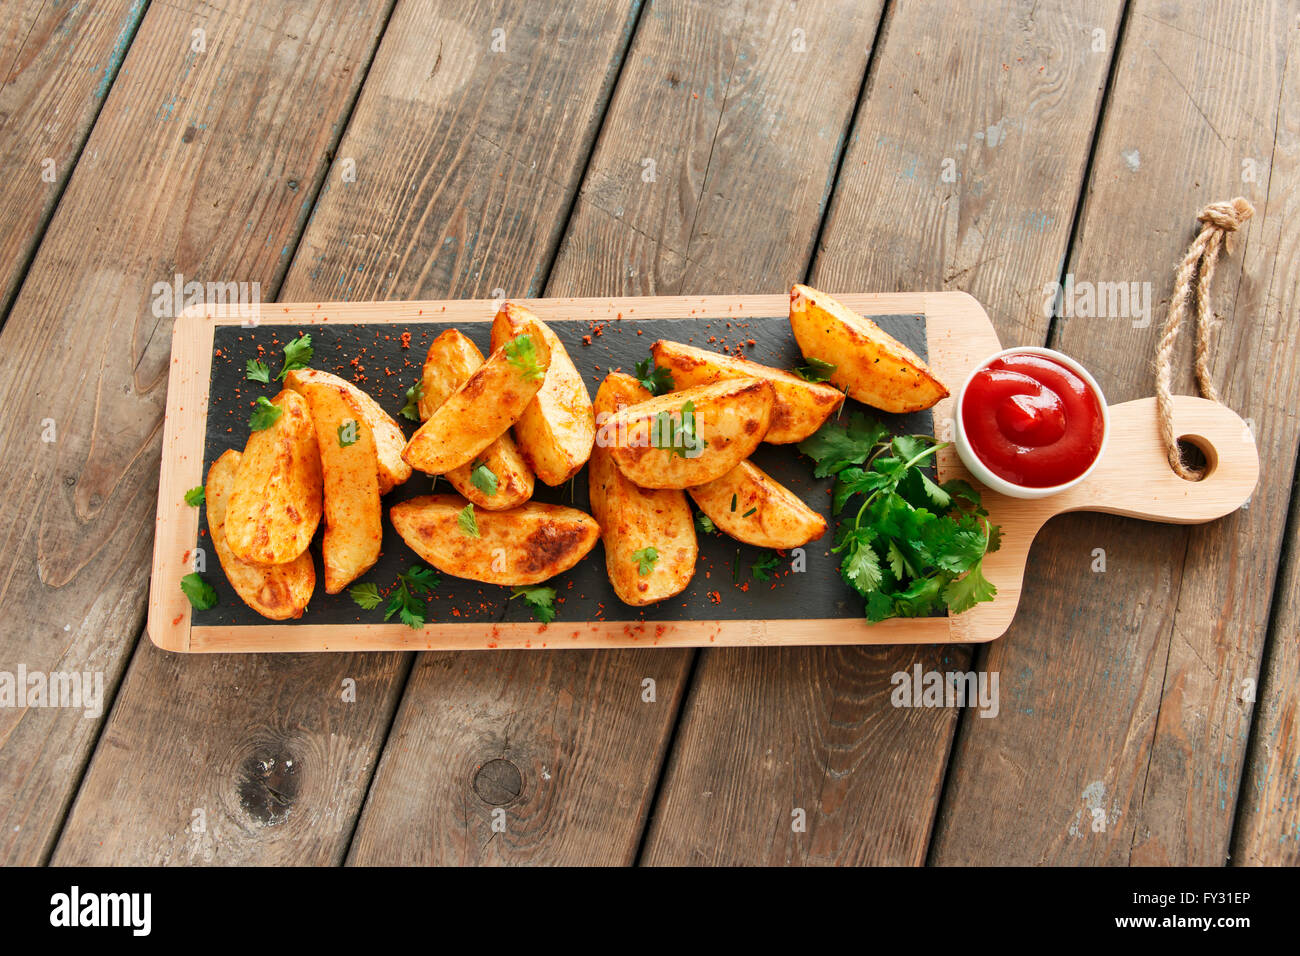 baked roasted potato wedges with herbs Stock Photo